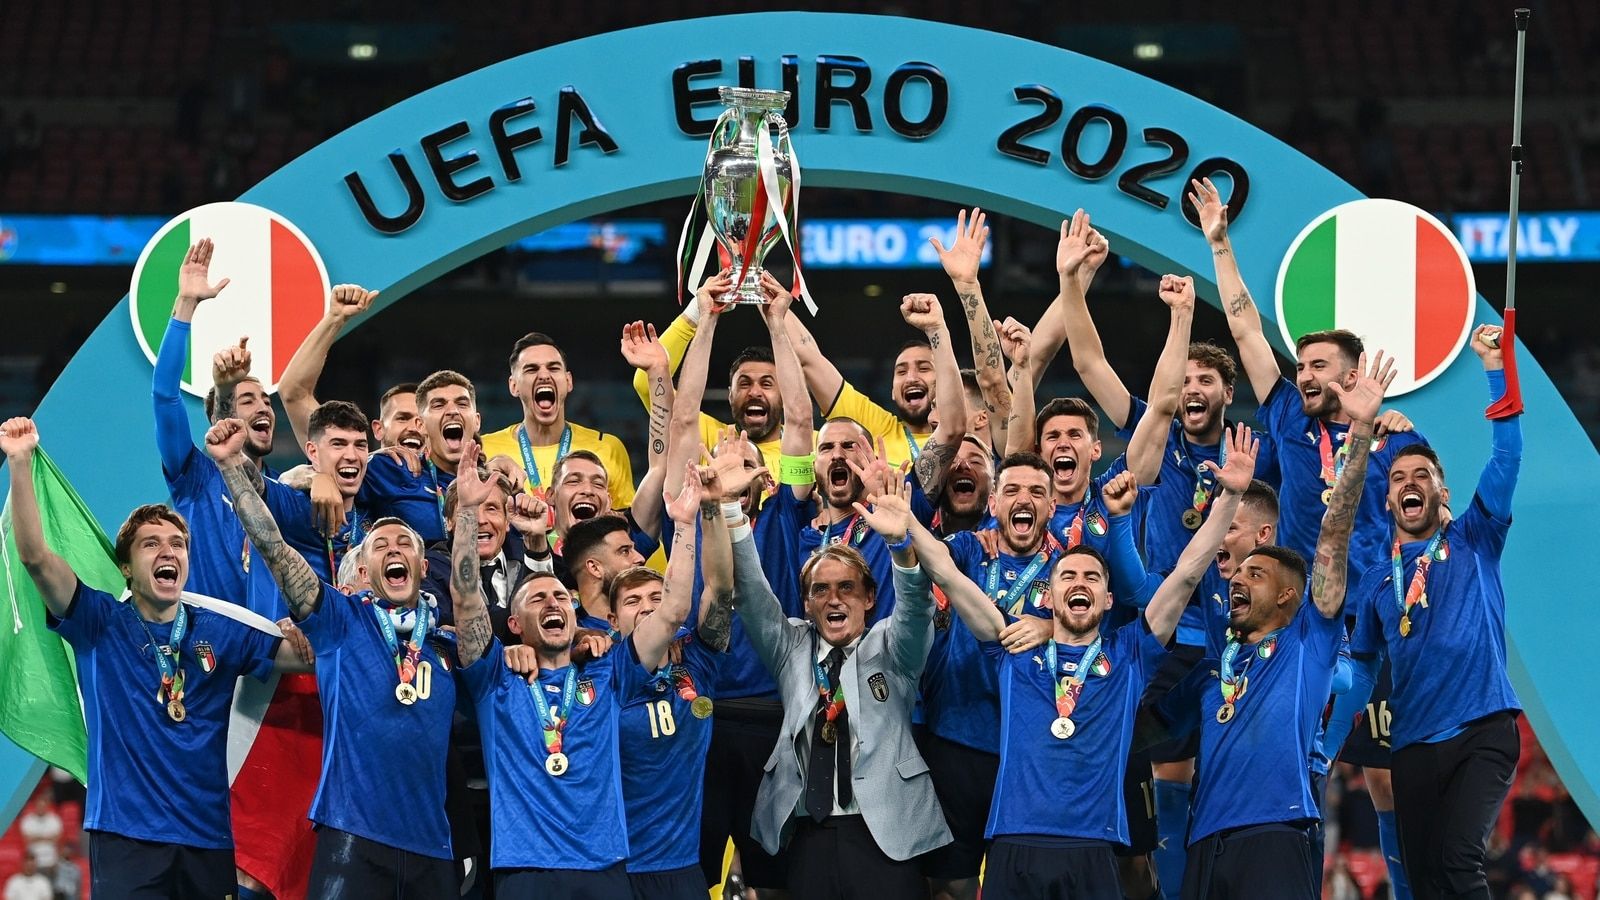 Euro 2020 Final: Italy Beat England 3 2 On Penalties In Final To Win Their 2nd European Championship Title